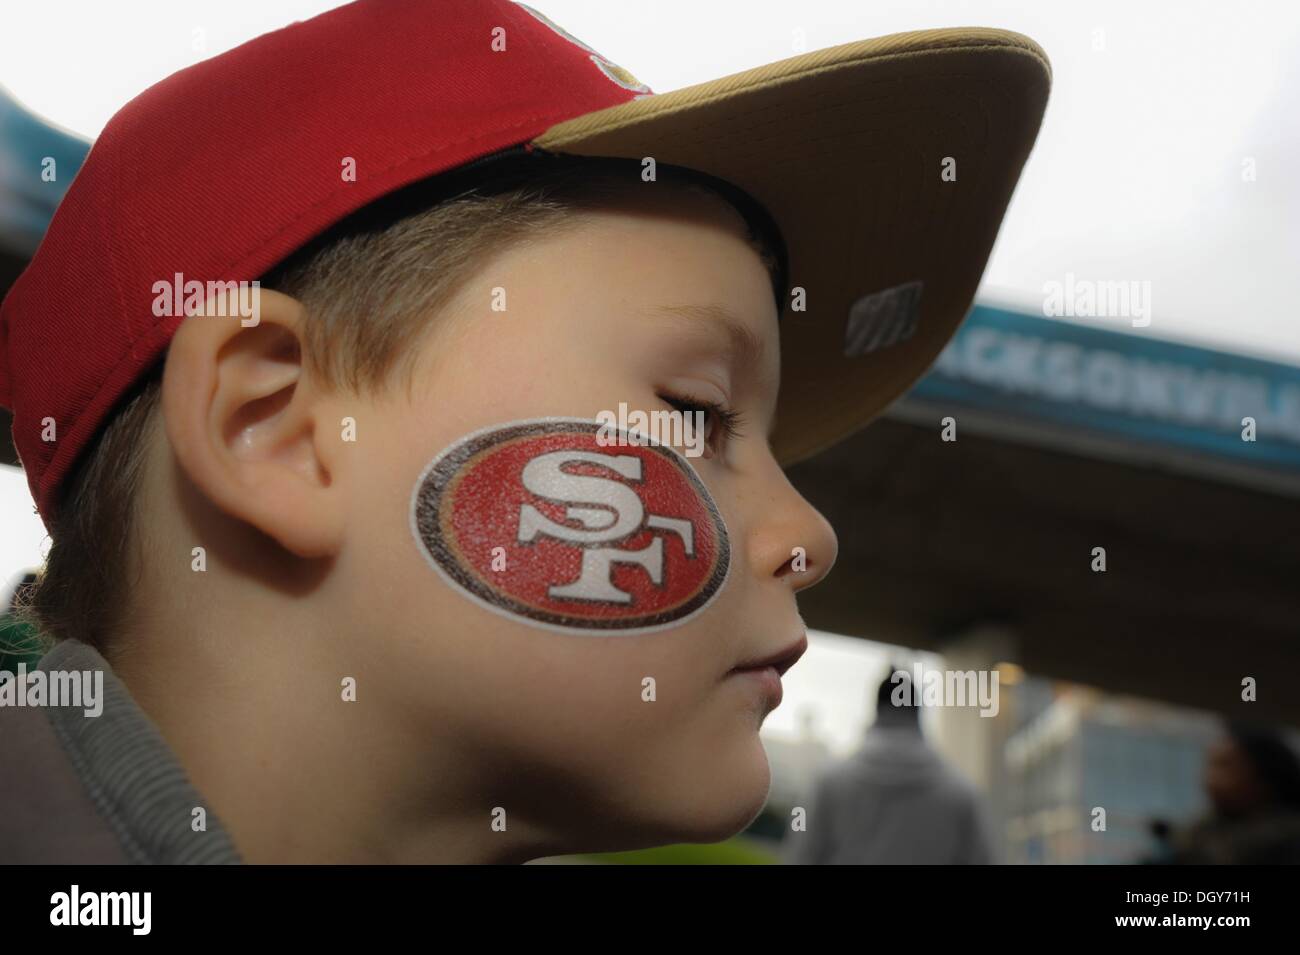 London, Brent, UK. 27th Oct, 2013. The 49ers, Super Bowl runners-up last season, scored six touchdowns in a 42-10 victory played in London's Wembley Stadium © Gail Orenstein/ZUMAPRESS.com/Alamy Live News Stock Photo